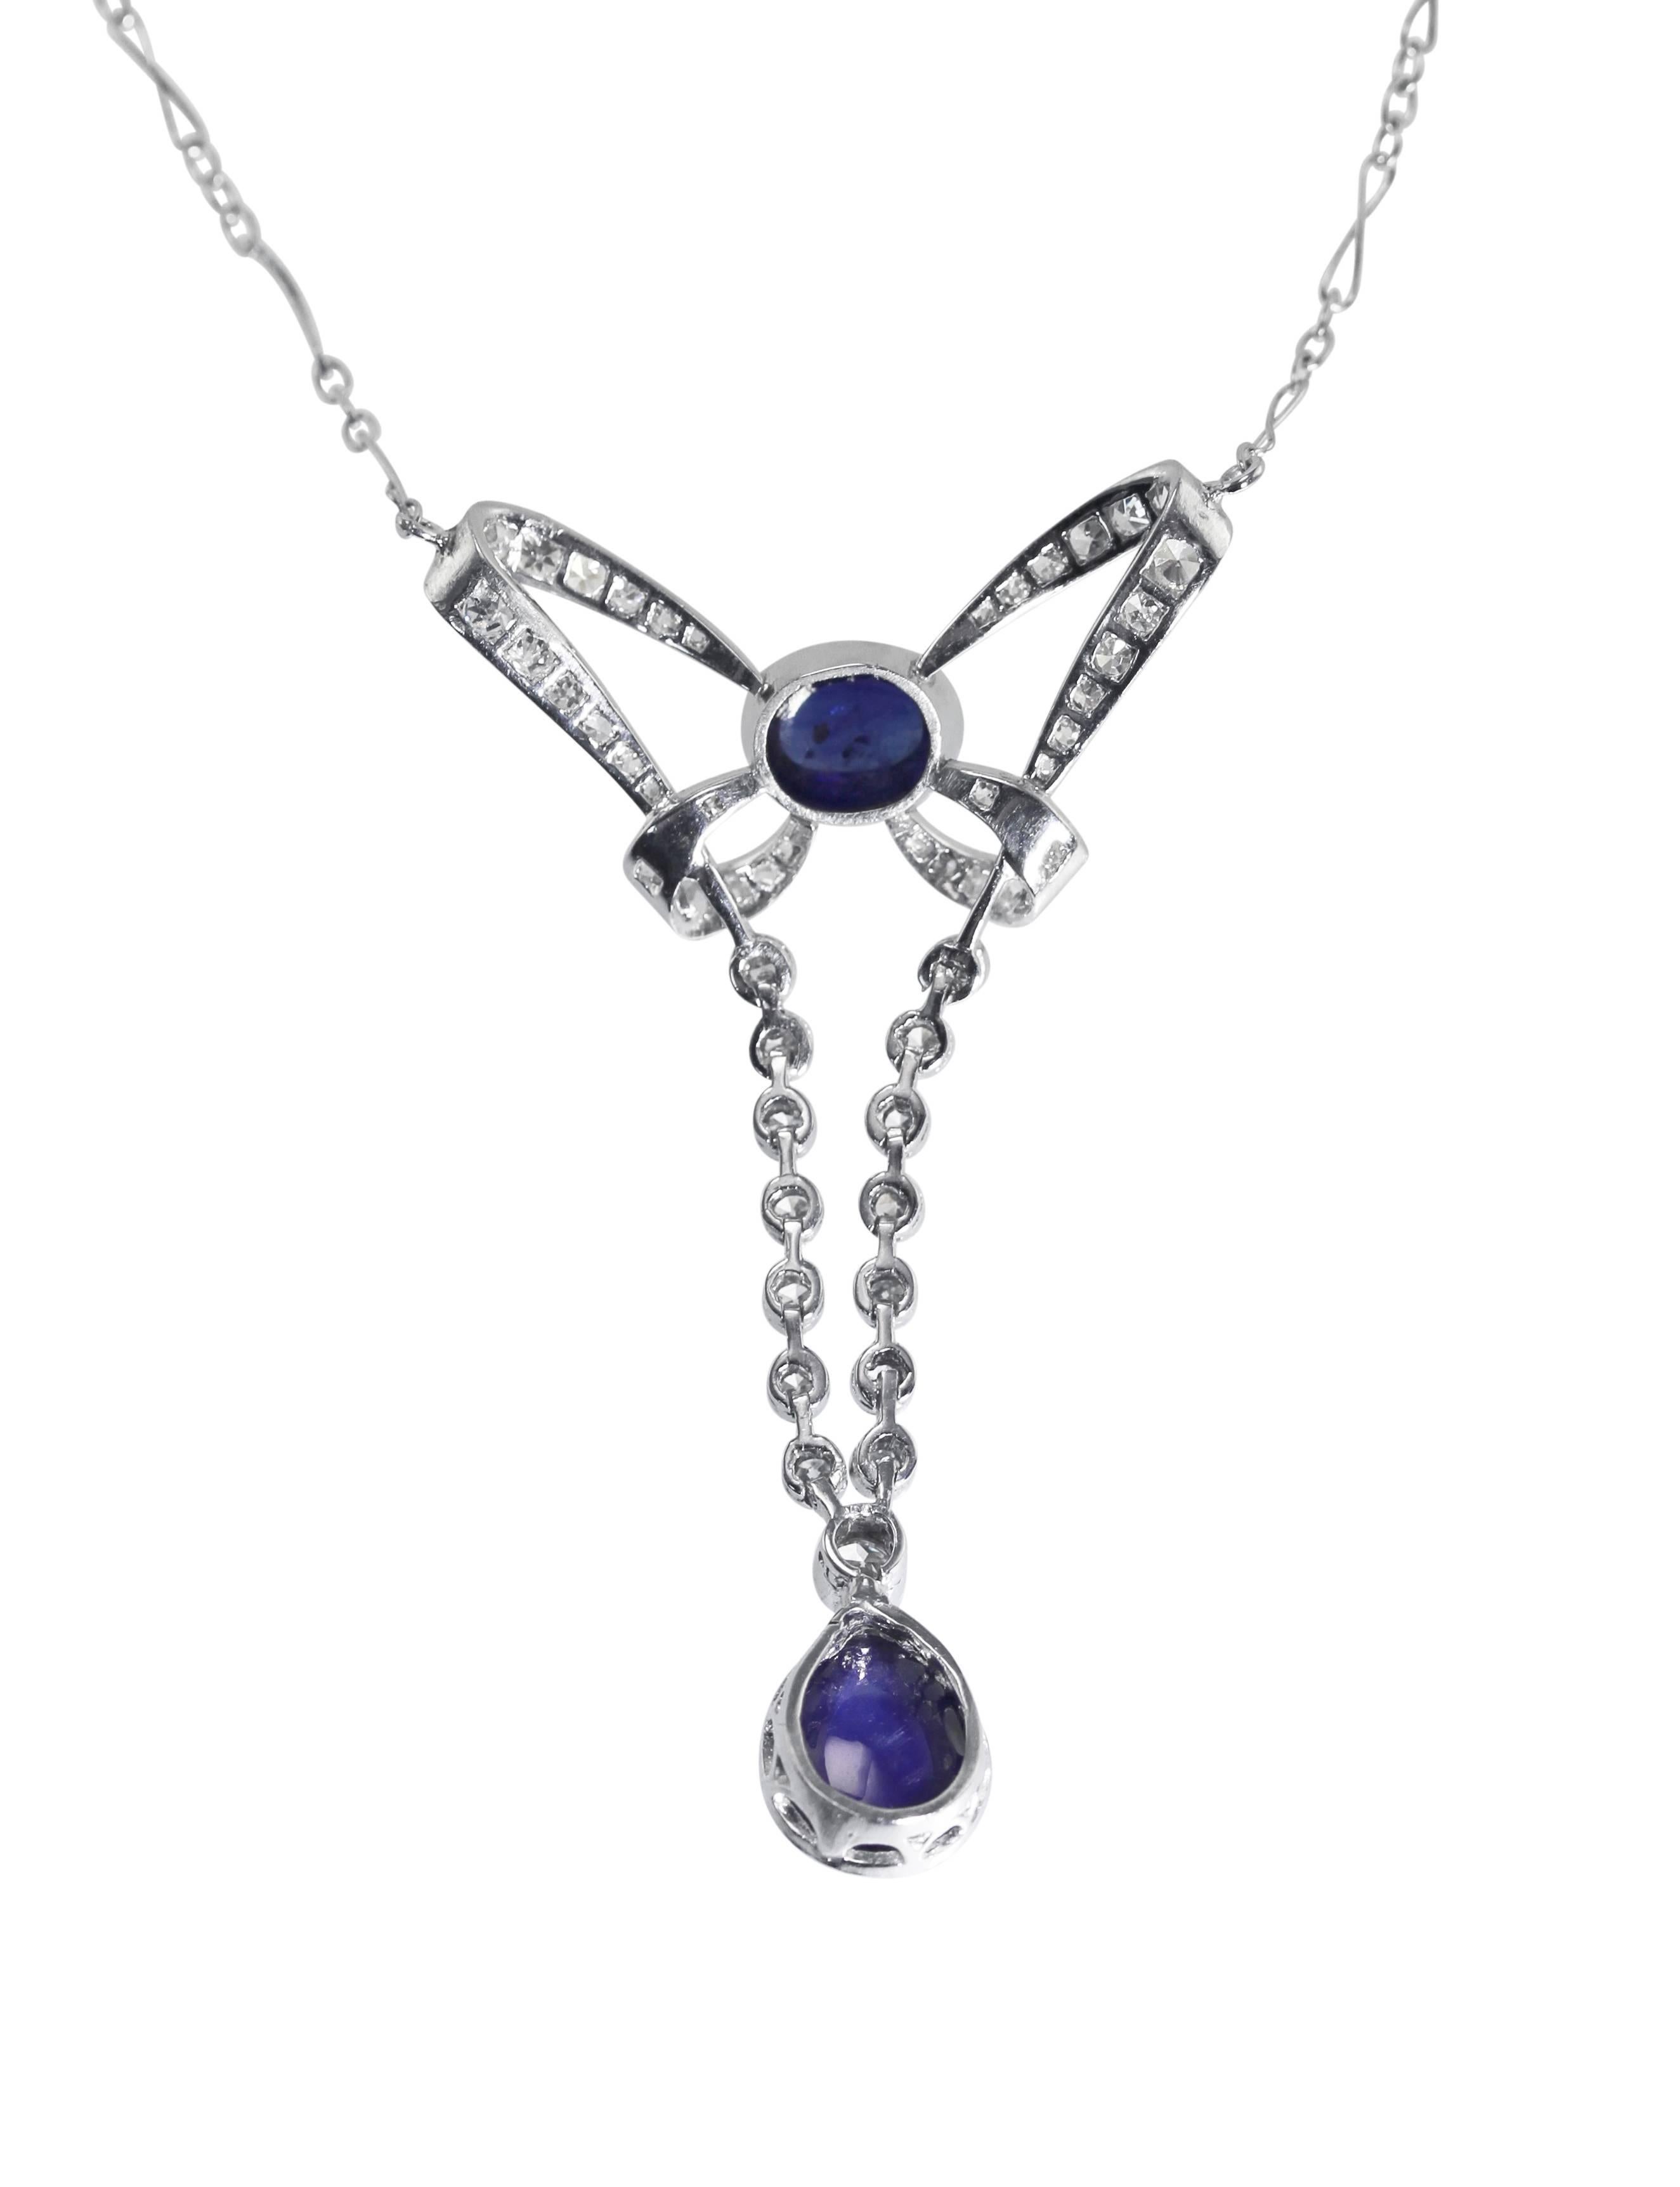 An Early 20th Century platinum, sapphire and diamond pendant-necklace, the articulated pendant designed as an ornate bow set at the top with a cabochon sapphire weighing approximately 1.50 carats, suspending a pendant set with a pear cabochon